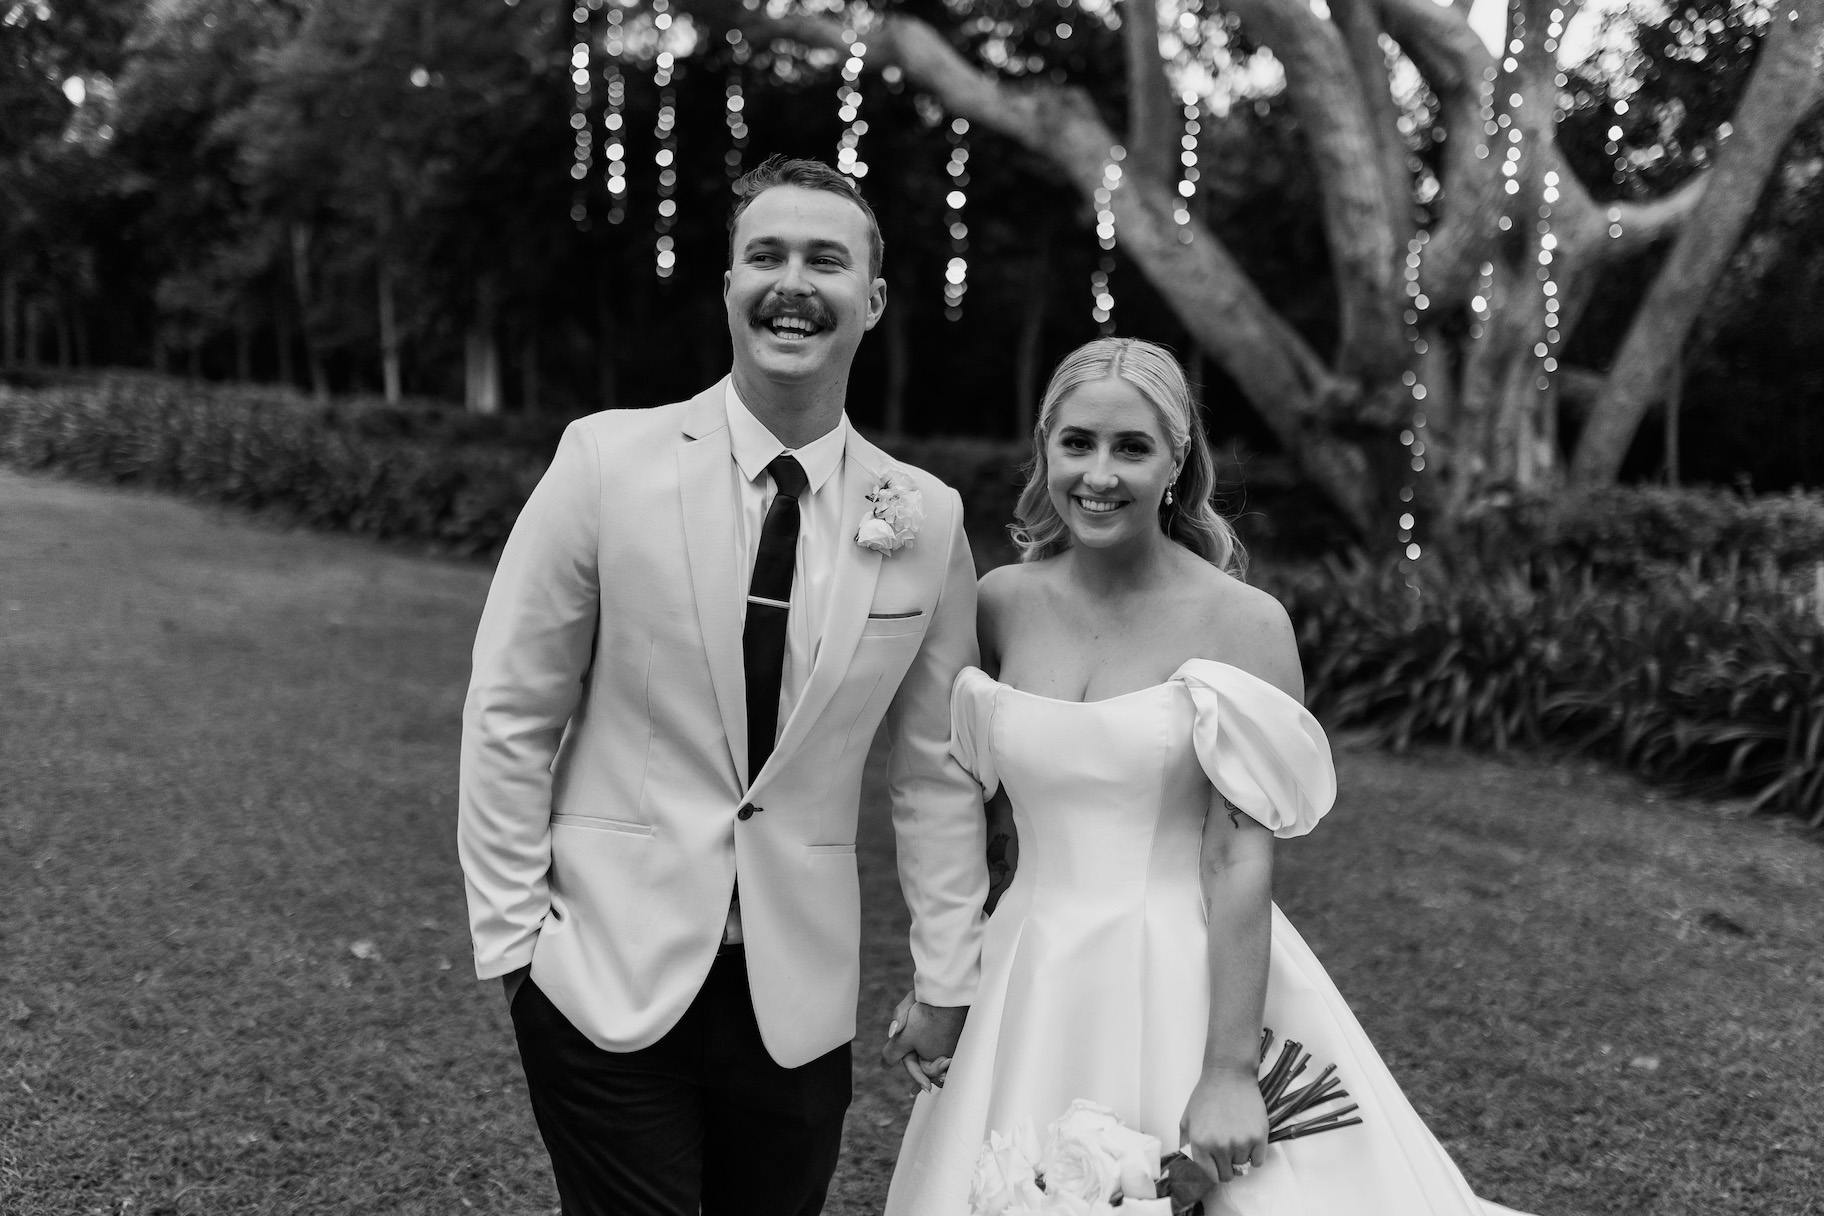 Black and white photo of a couple on their wedding day. The groom wears a light-colored suit and has a mustache, while the bride wears an off-shoulder wedding dress and holds a bouquet. They smile and stand outdoors with fairy lights hanging from trees in the background.